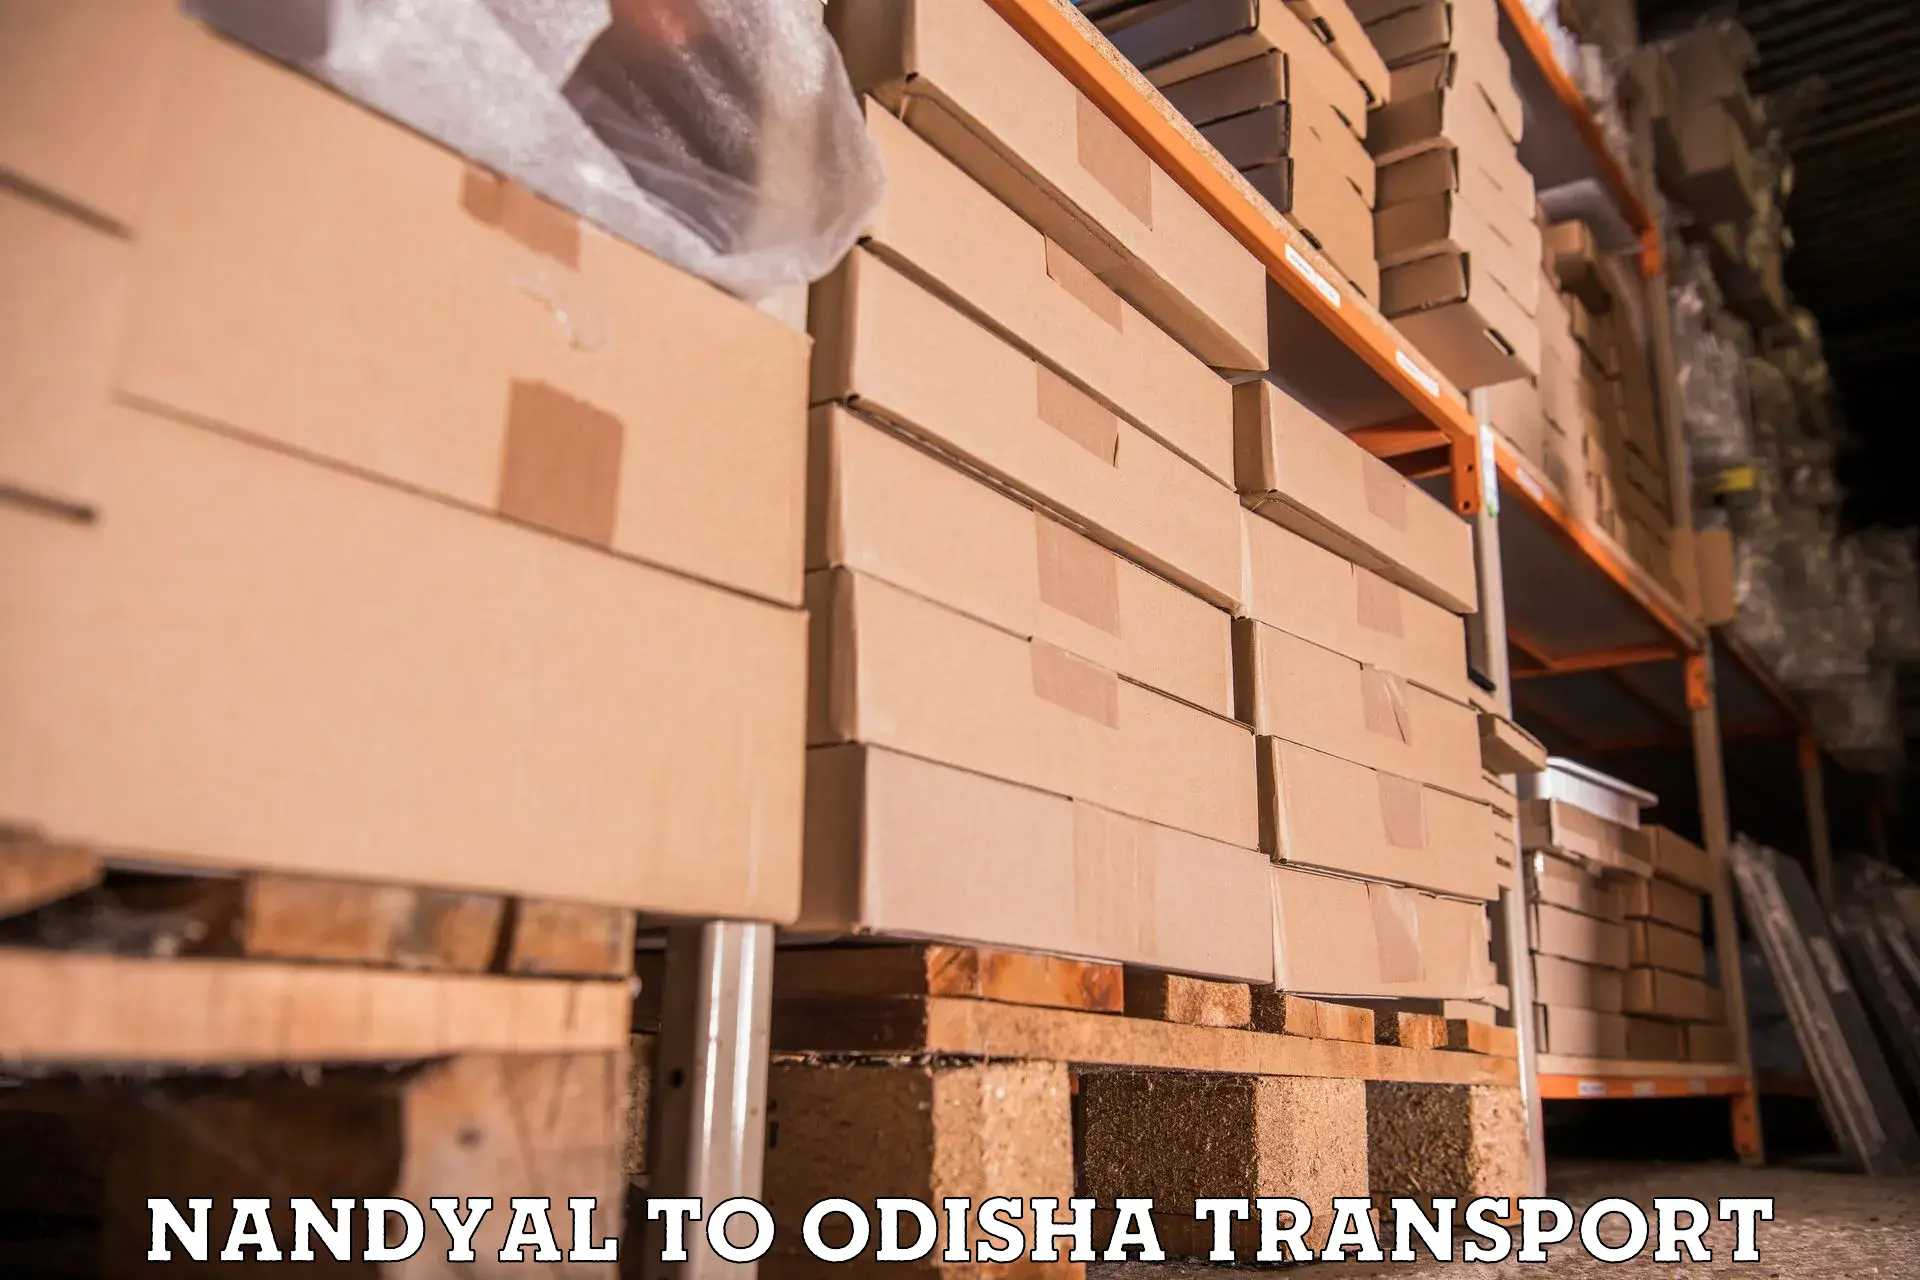 Container transport service Nandyal to Chandipur